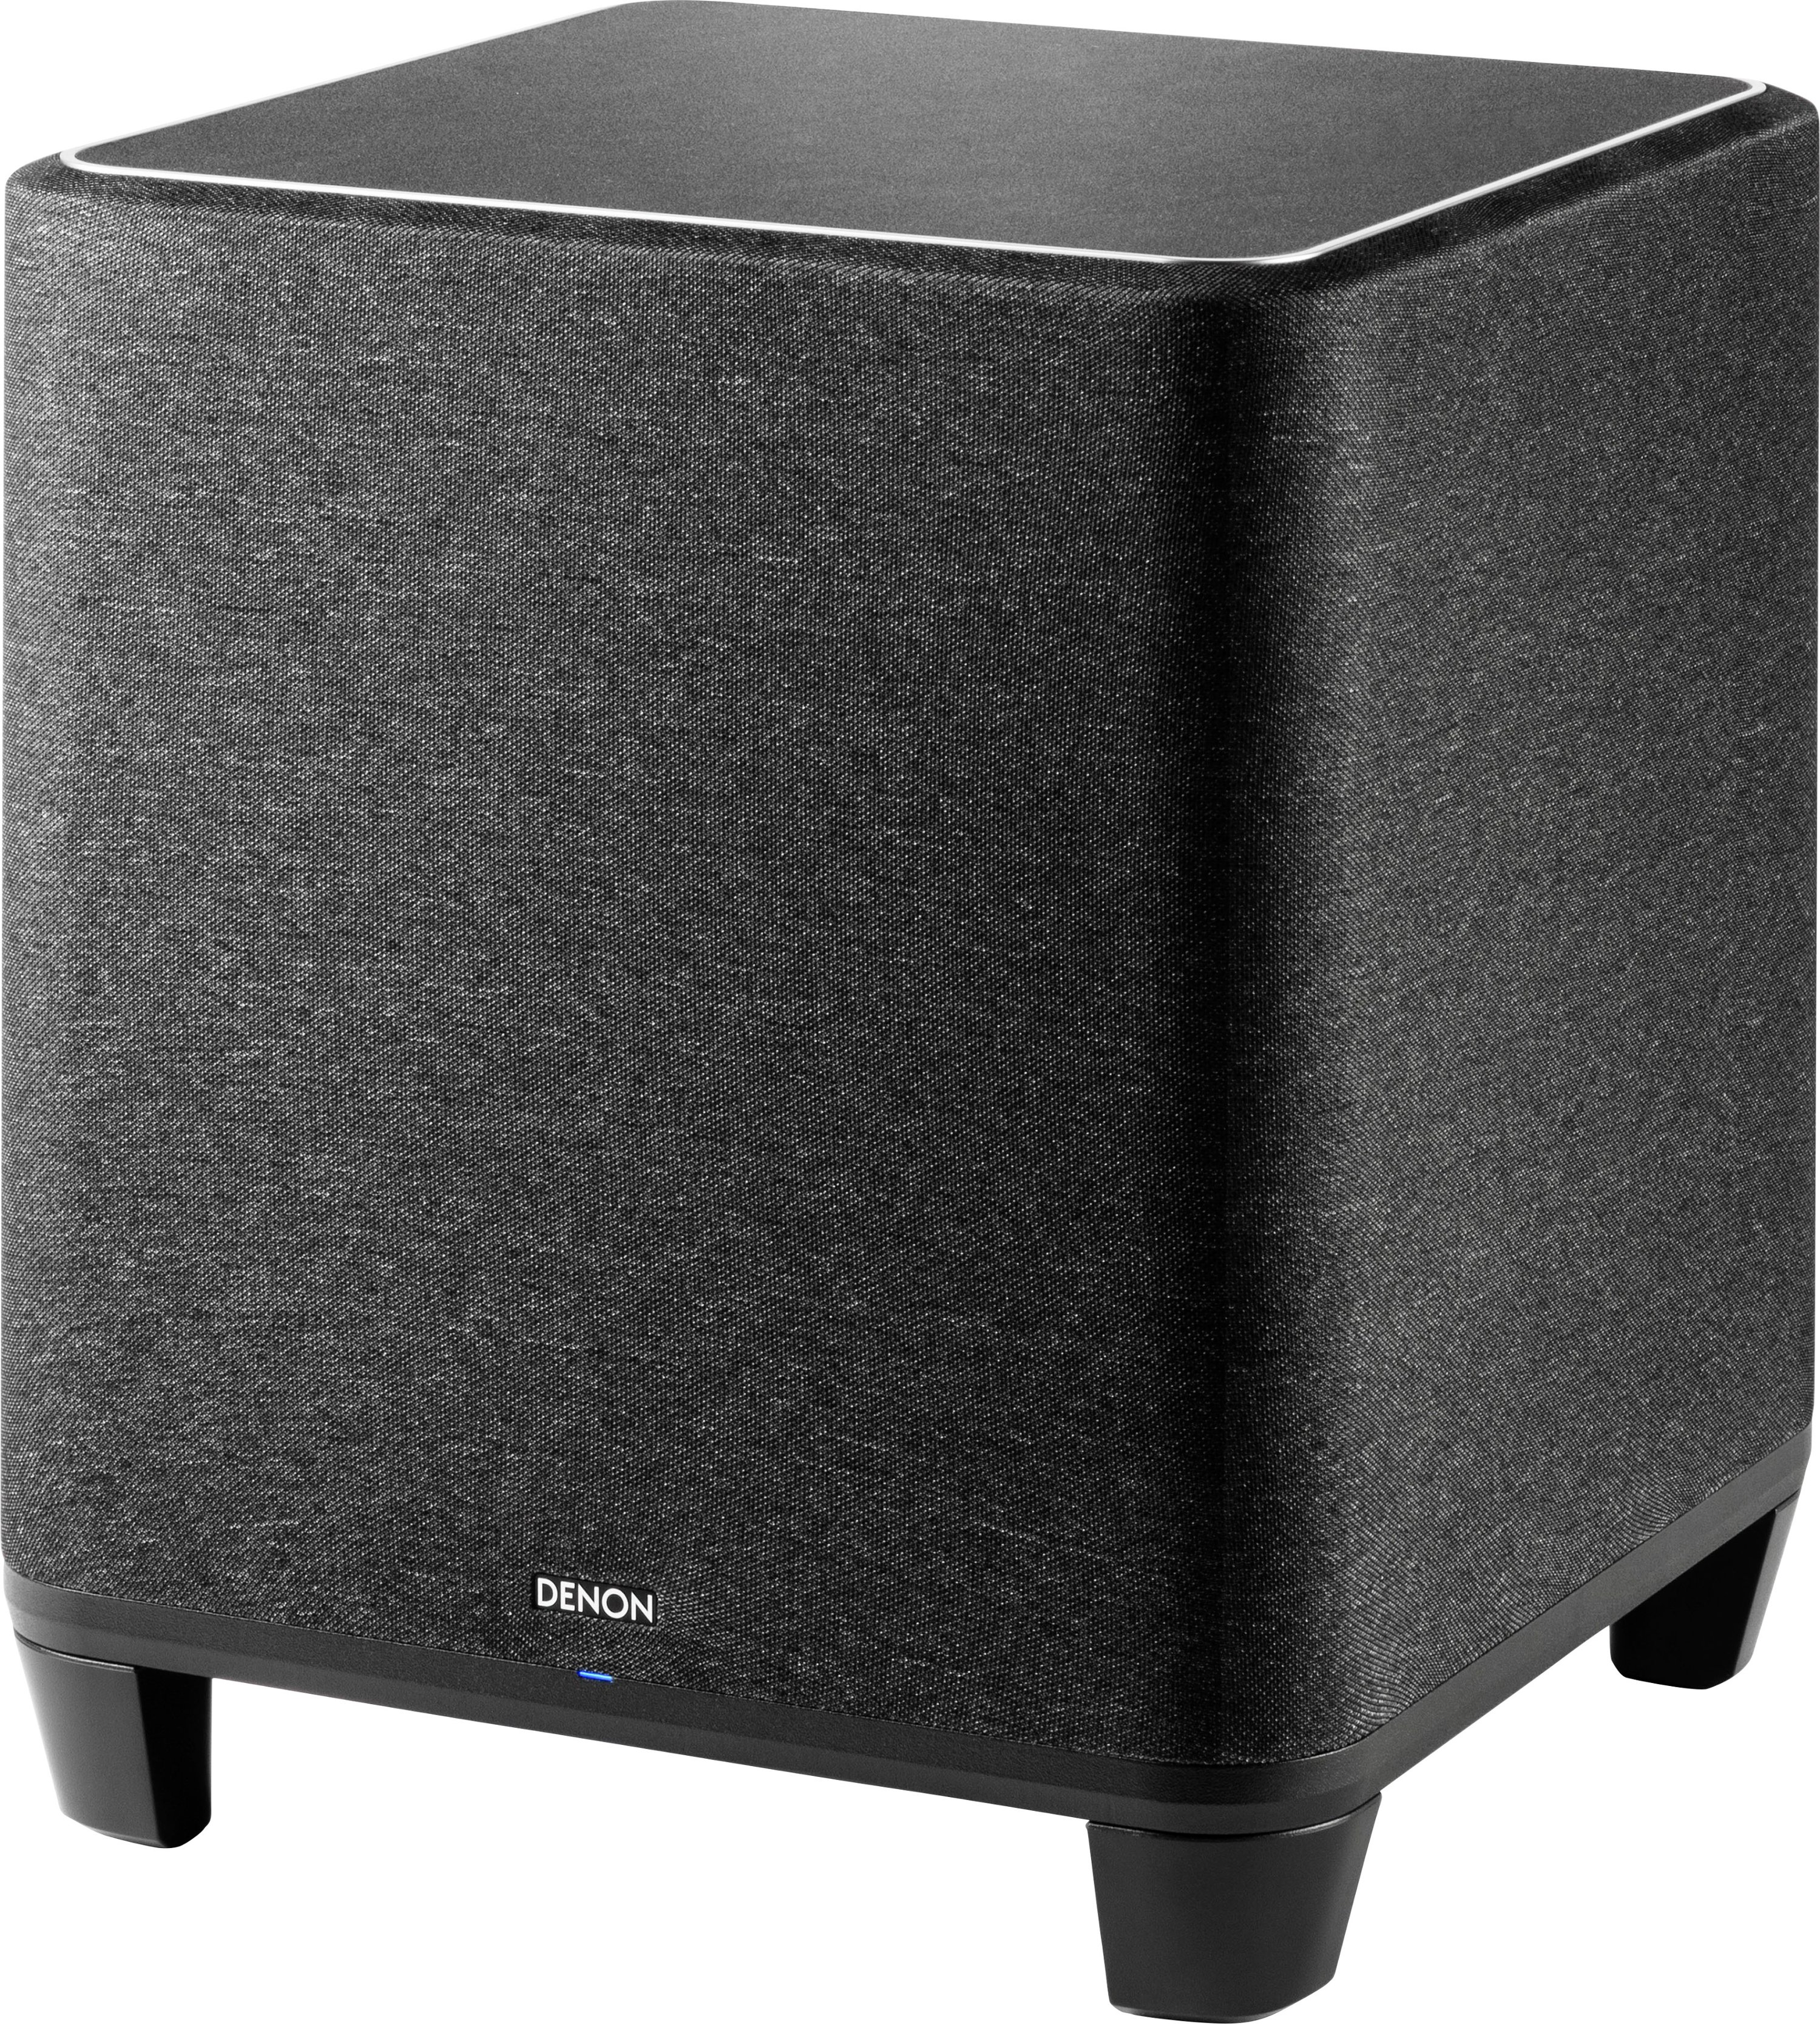 Buy Home Subwoofer Best HEOS Wireless with Built-in Black DENONHOMESUB Denon -